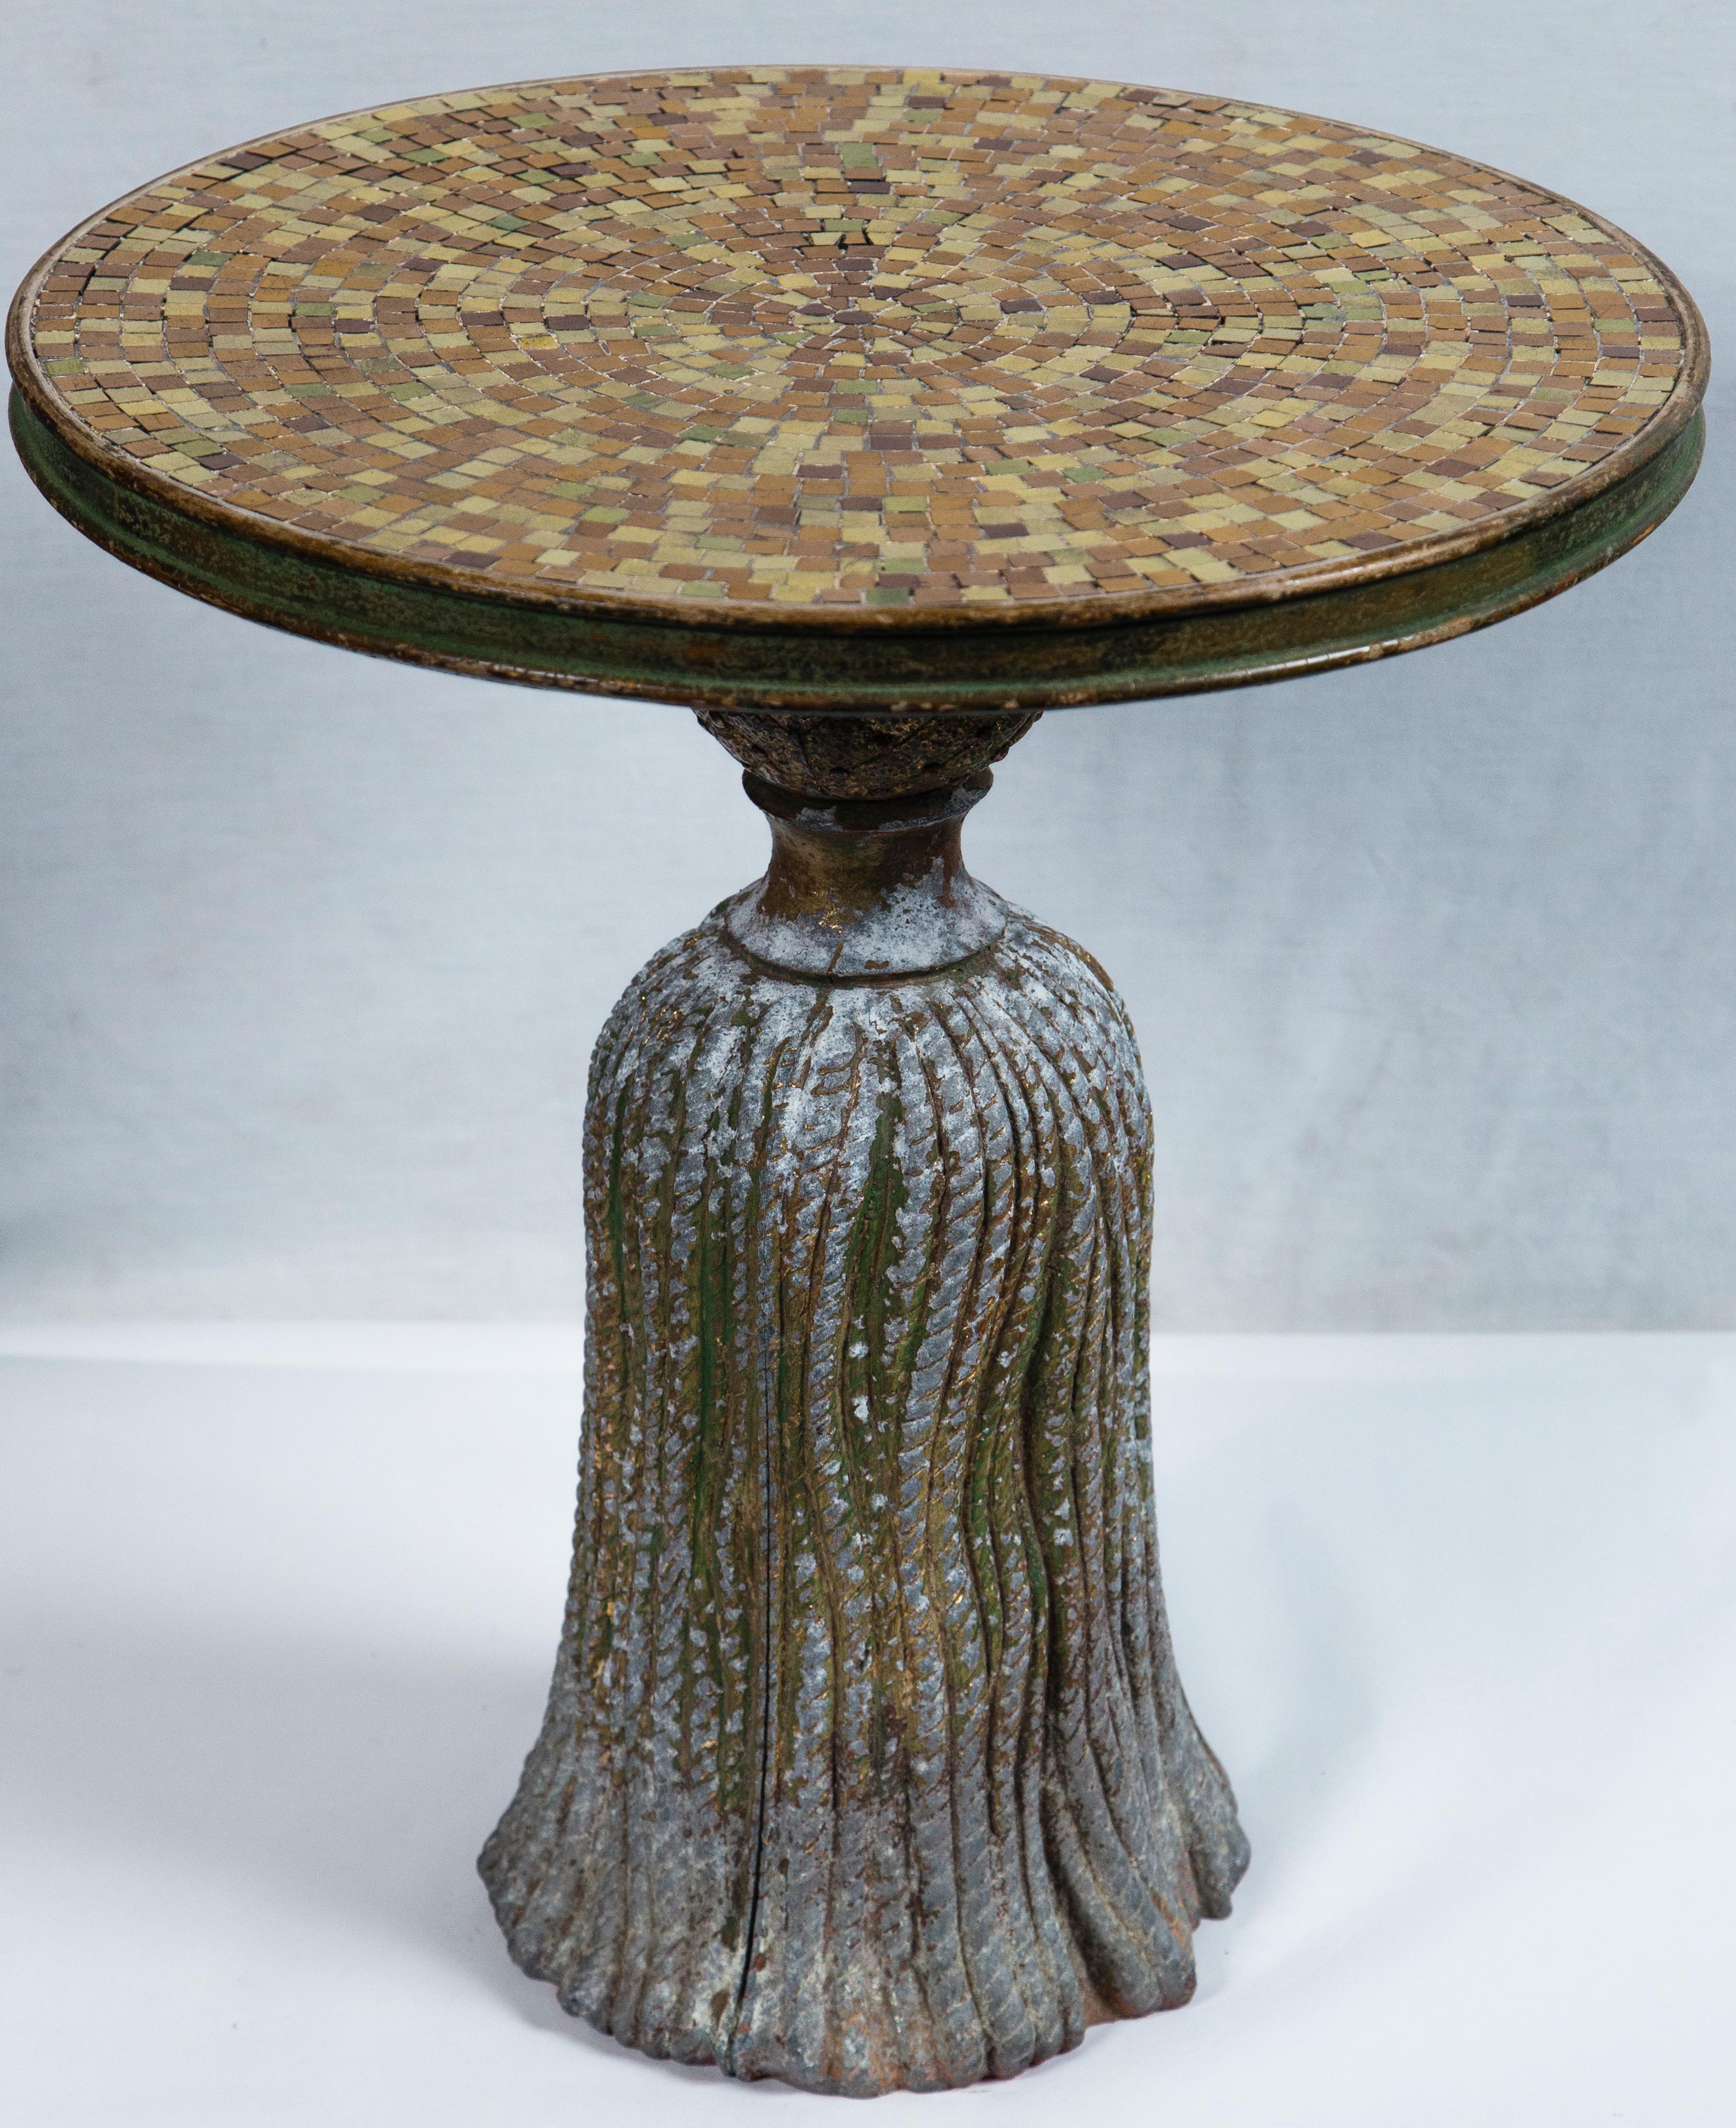 Pair of Ceramic Mosaic Tile Top Tassel Tables In Good Condition For Sale In Stamford, CT